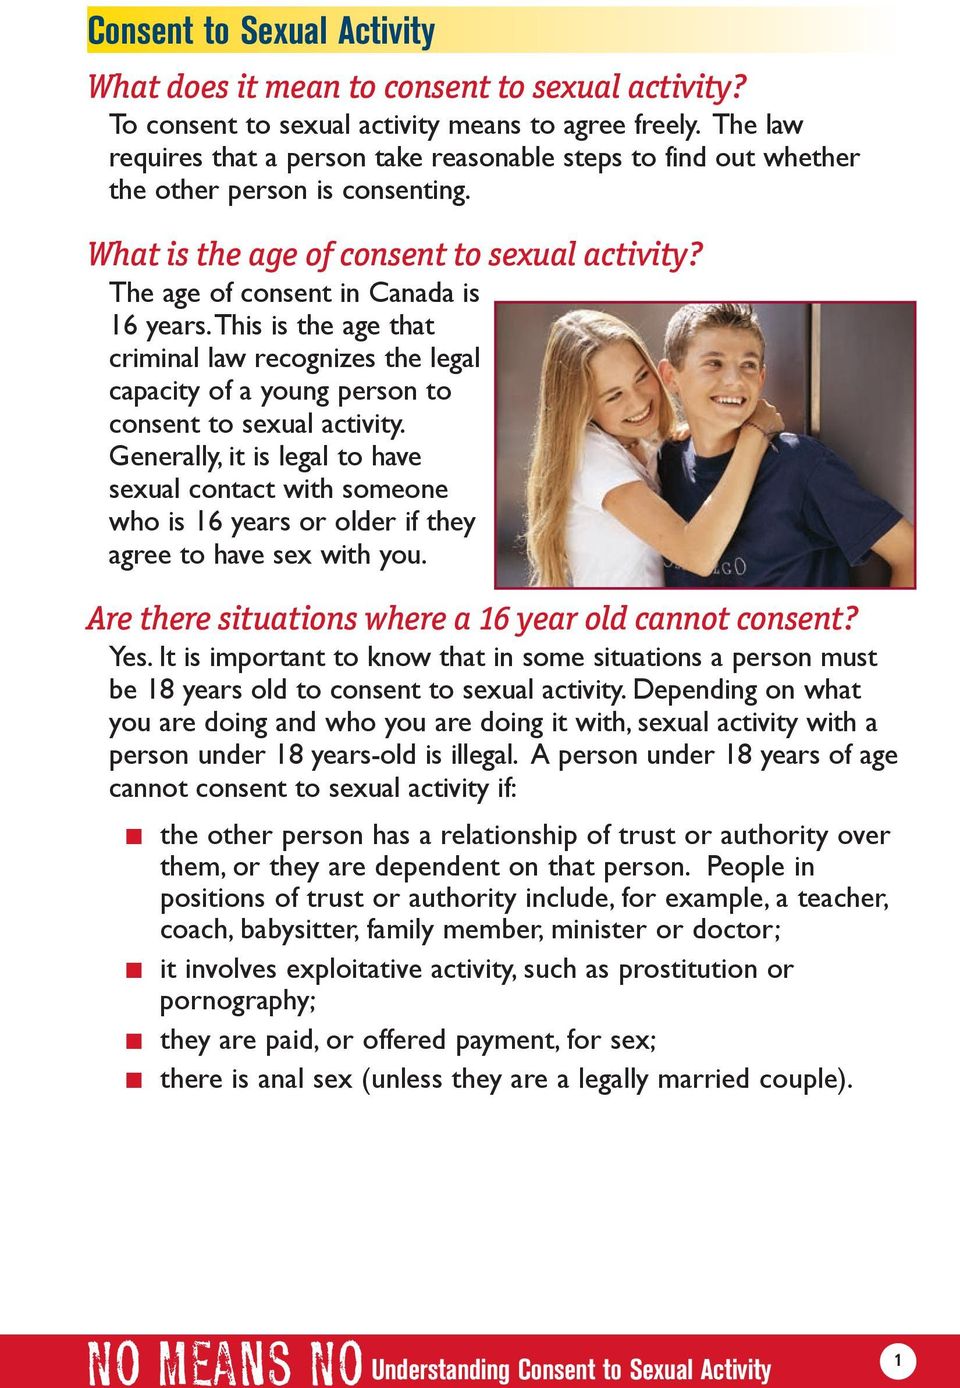 This is the age that criminal law recognizes the legal capacity of a young person to consent to sexual activity.